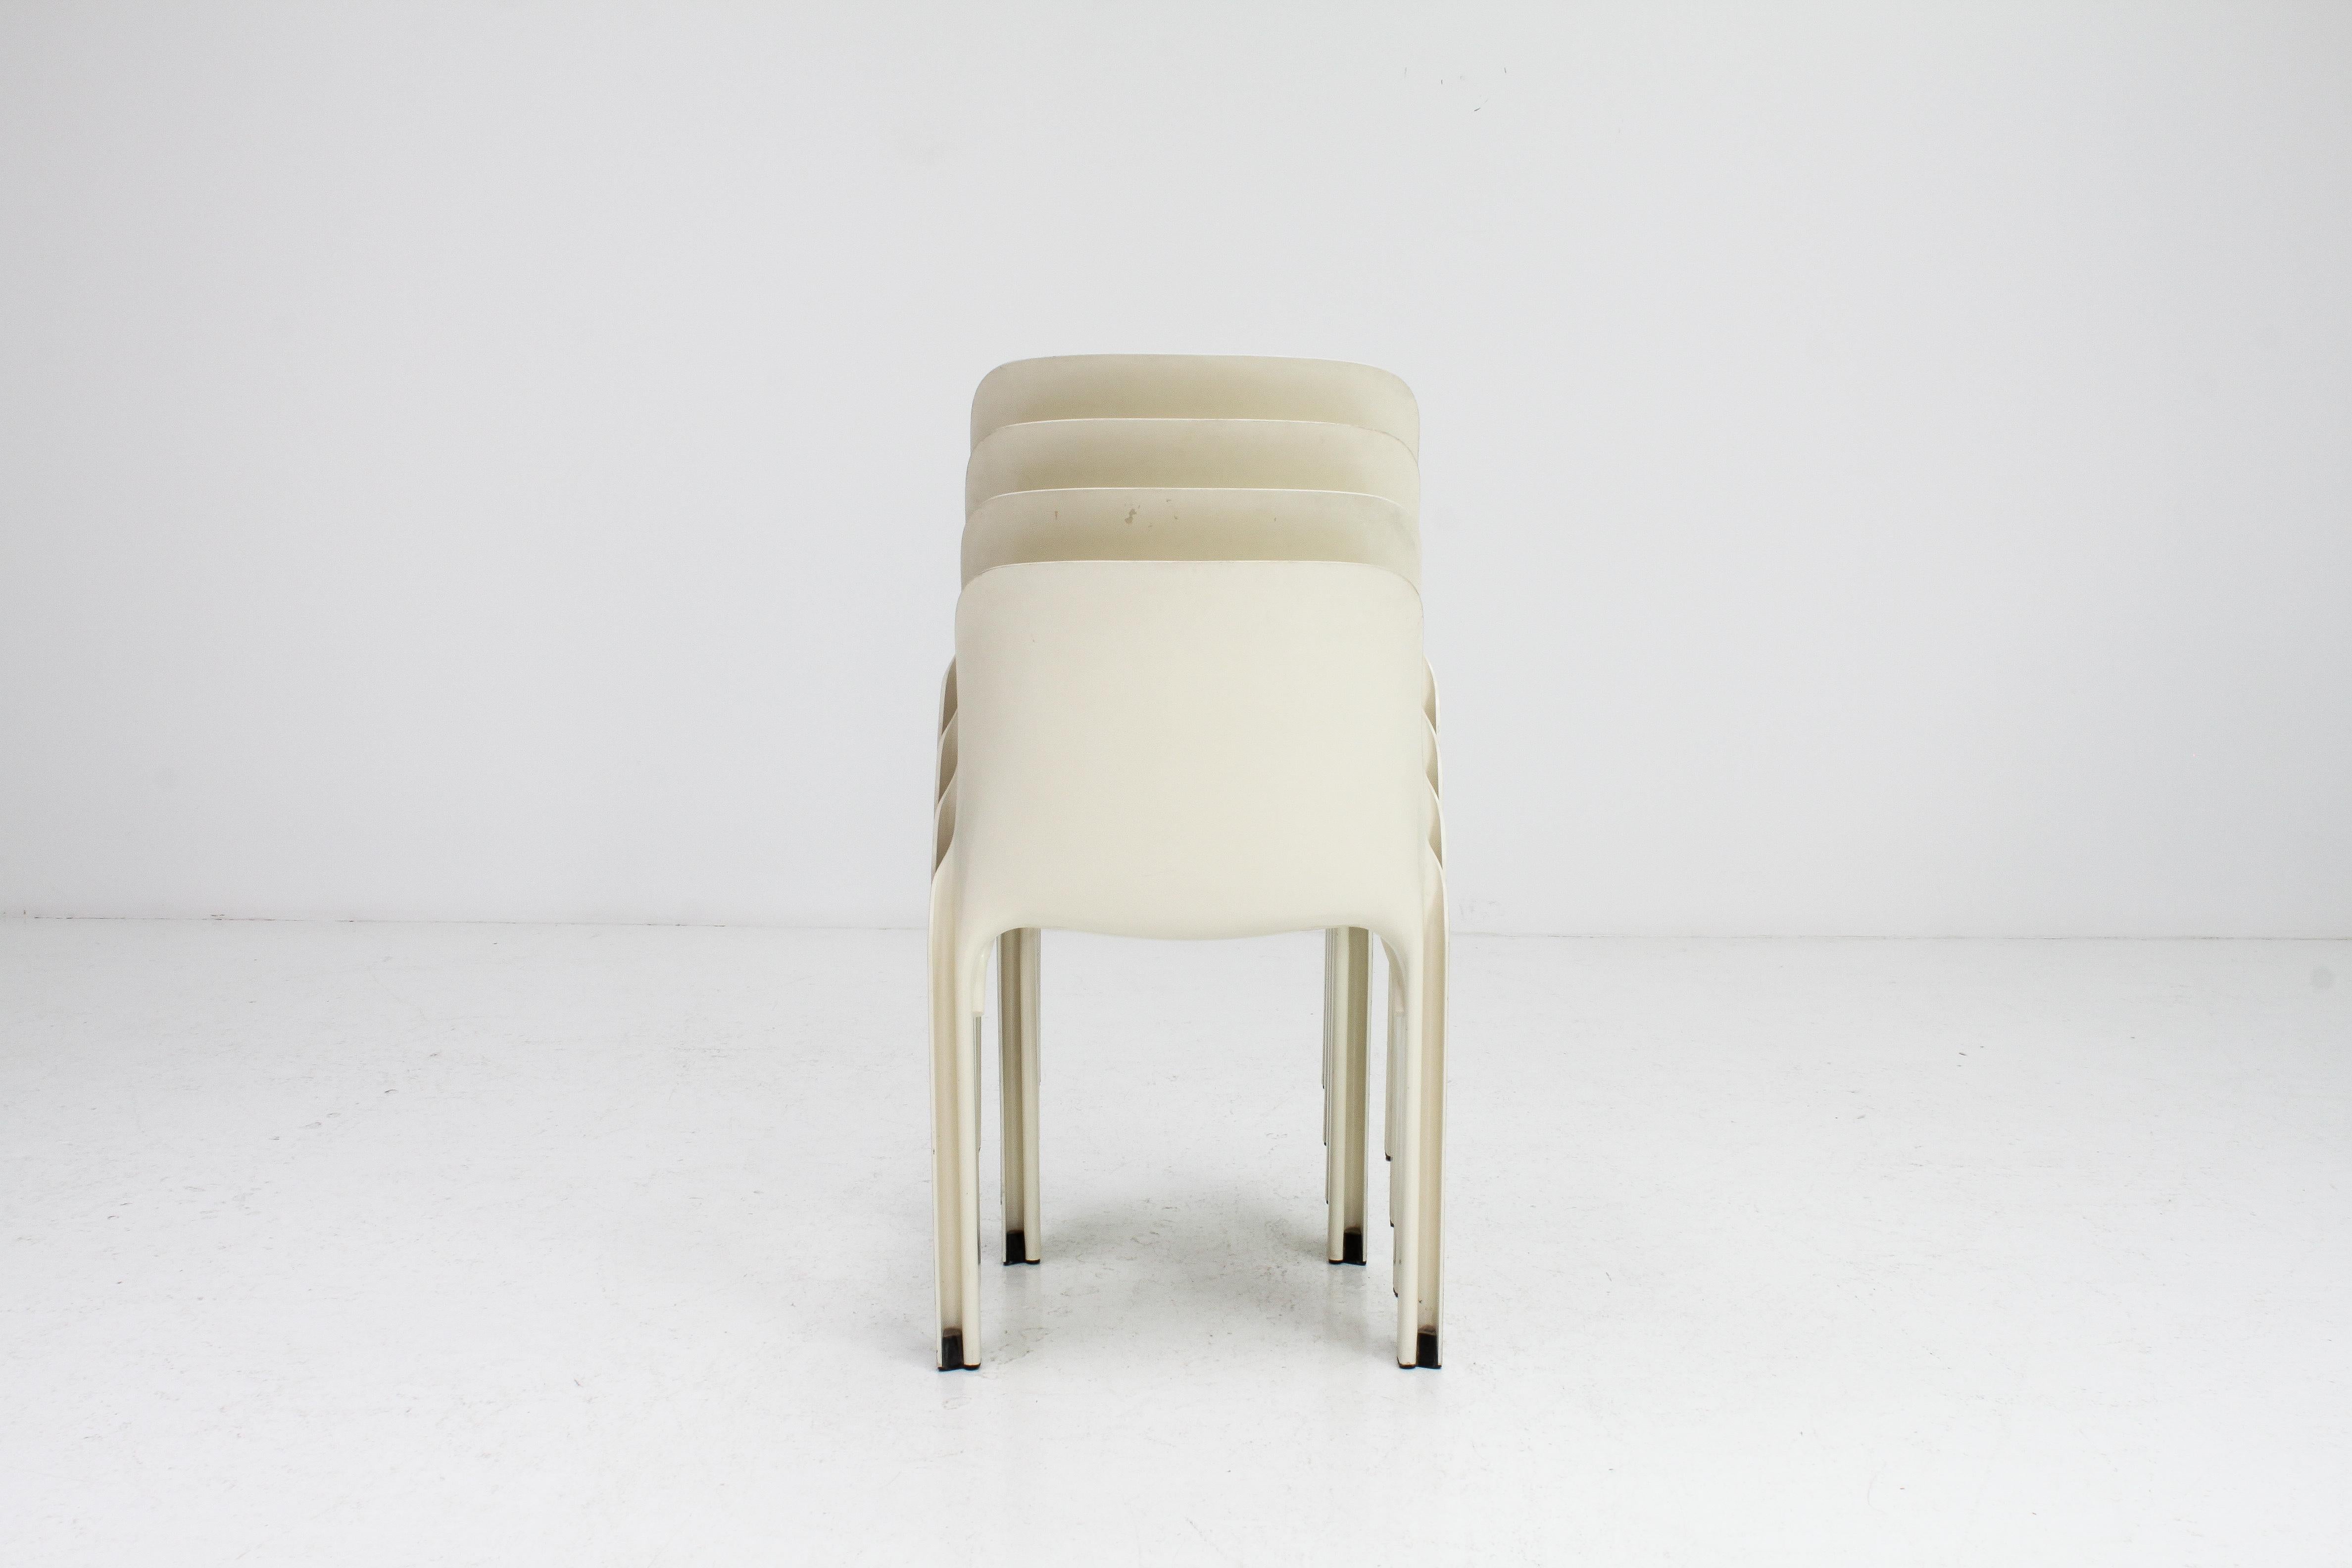 'Selene' Stacking Chairs in White by Vico Magistretti for Artemide, 1969 In Good Condition In London Road, Baldock, Hertfordshire